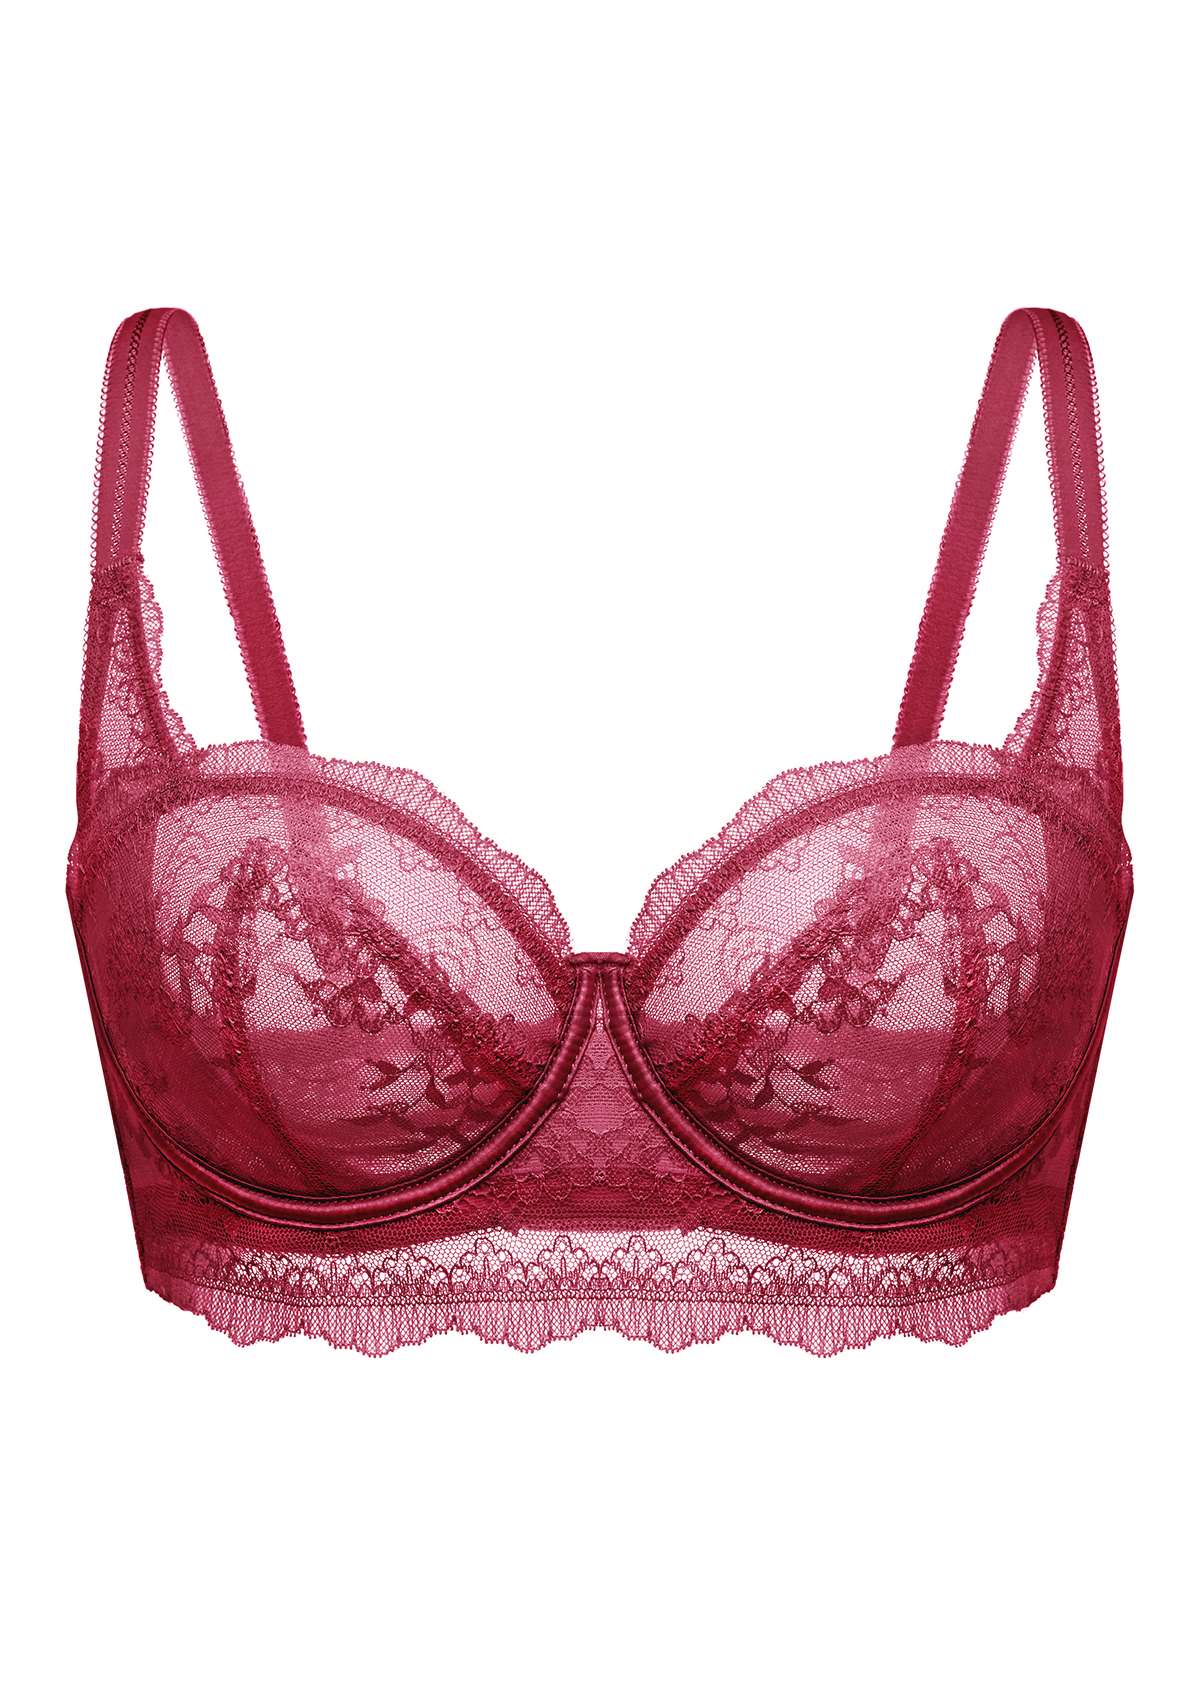 HSIA Floral Lace Unlined Bridal Balconette Bra Set - Supportive Classic - Burgundy / 40 / C